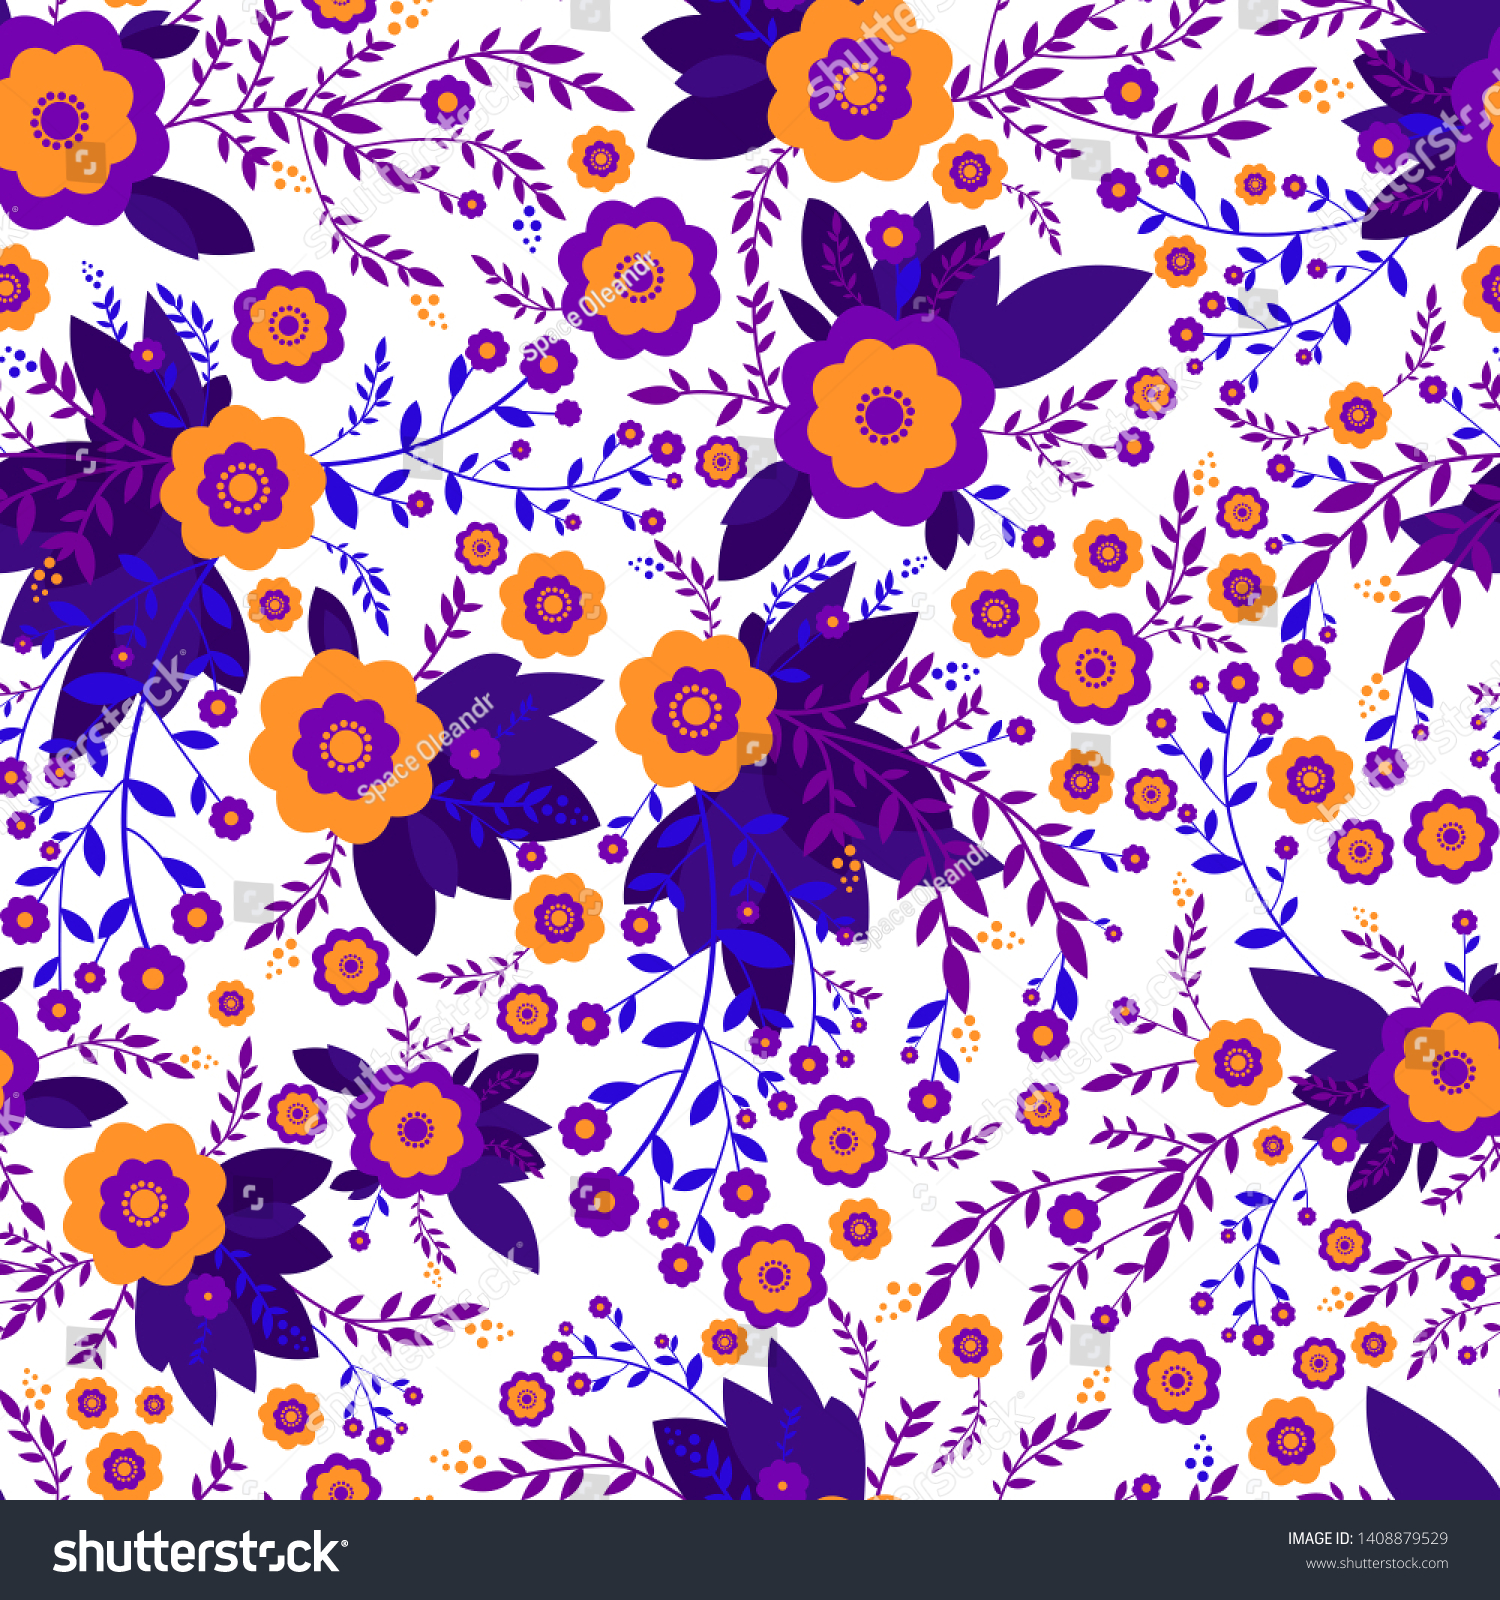 Colorful abstract wildflowers of orange, violet color, seamless texture pattern design. Decorative flowers and plants on white background. Raster original ornament flowers. Botanical floral background